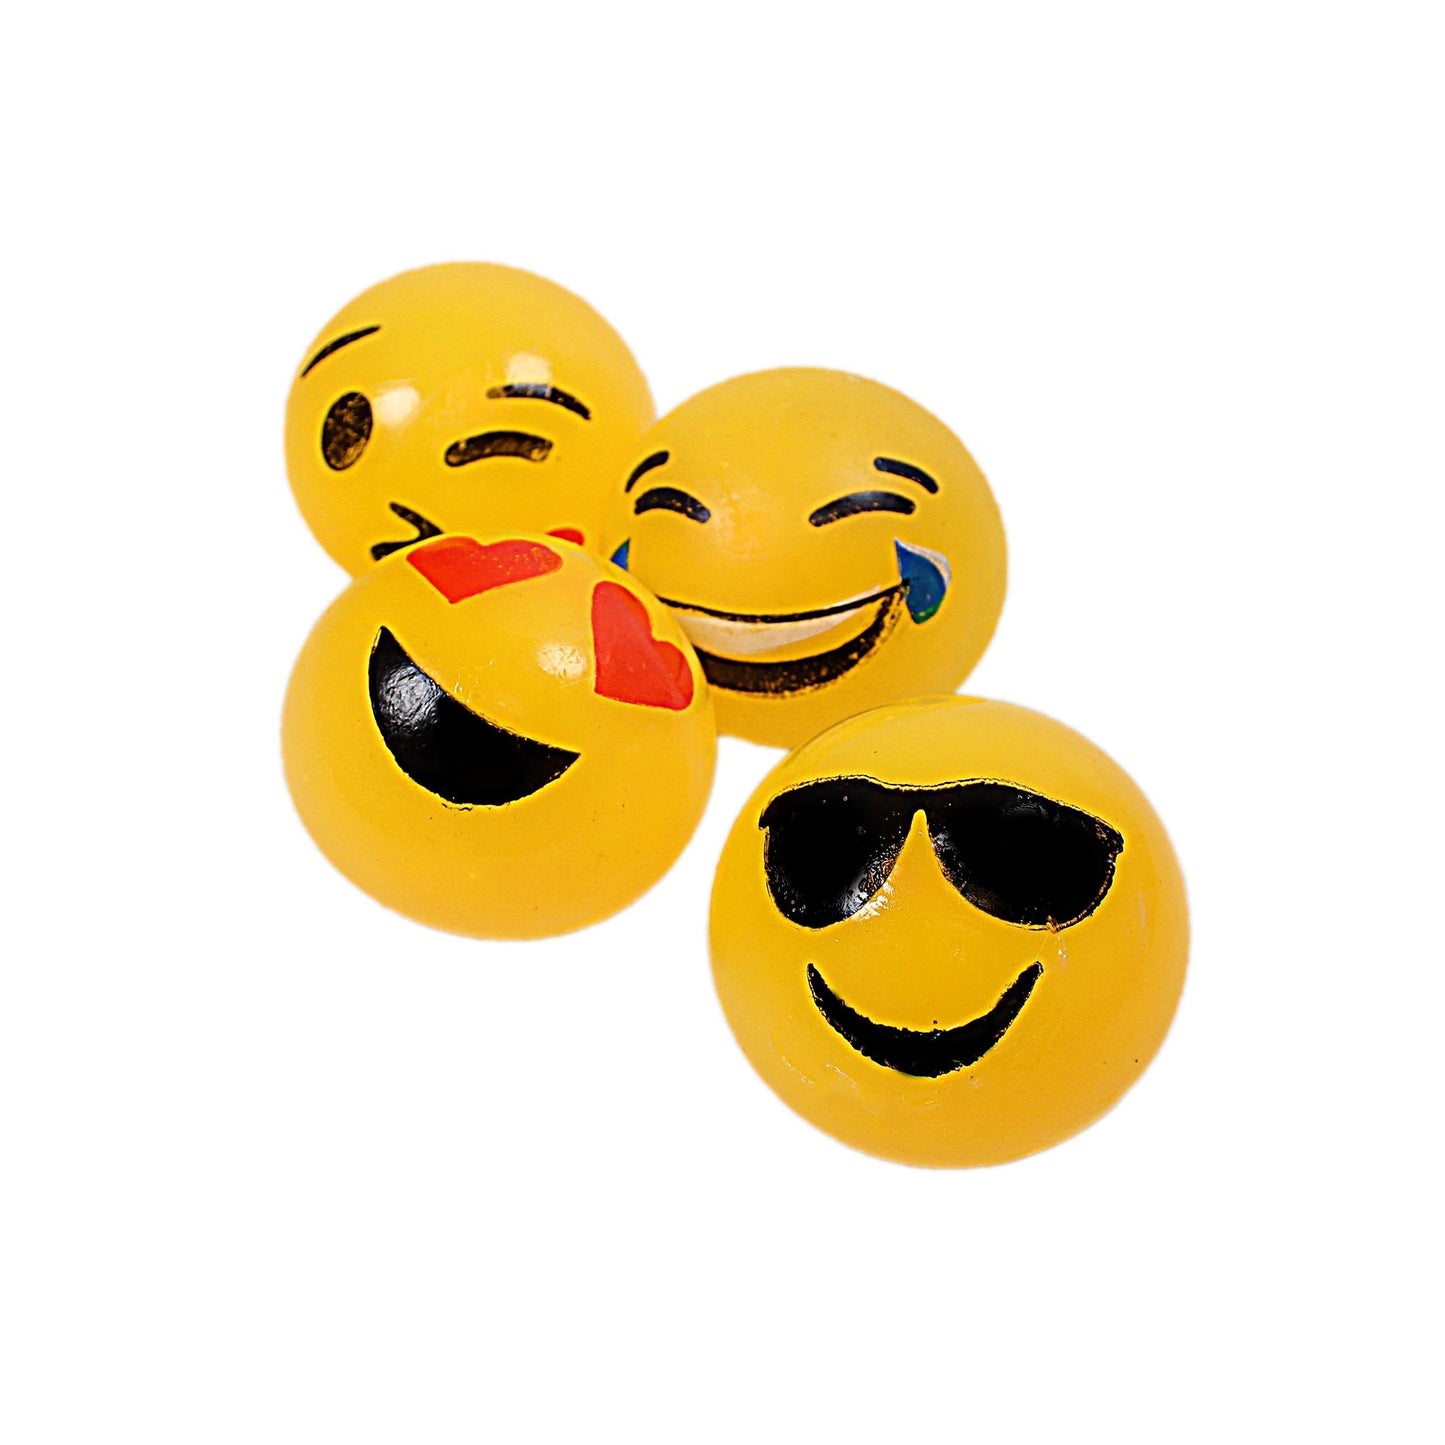 1 x Emoji Splat Ball Smiley Face Stress Squeeze Ball 5006 (Parcel Rate)